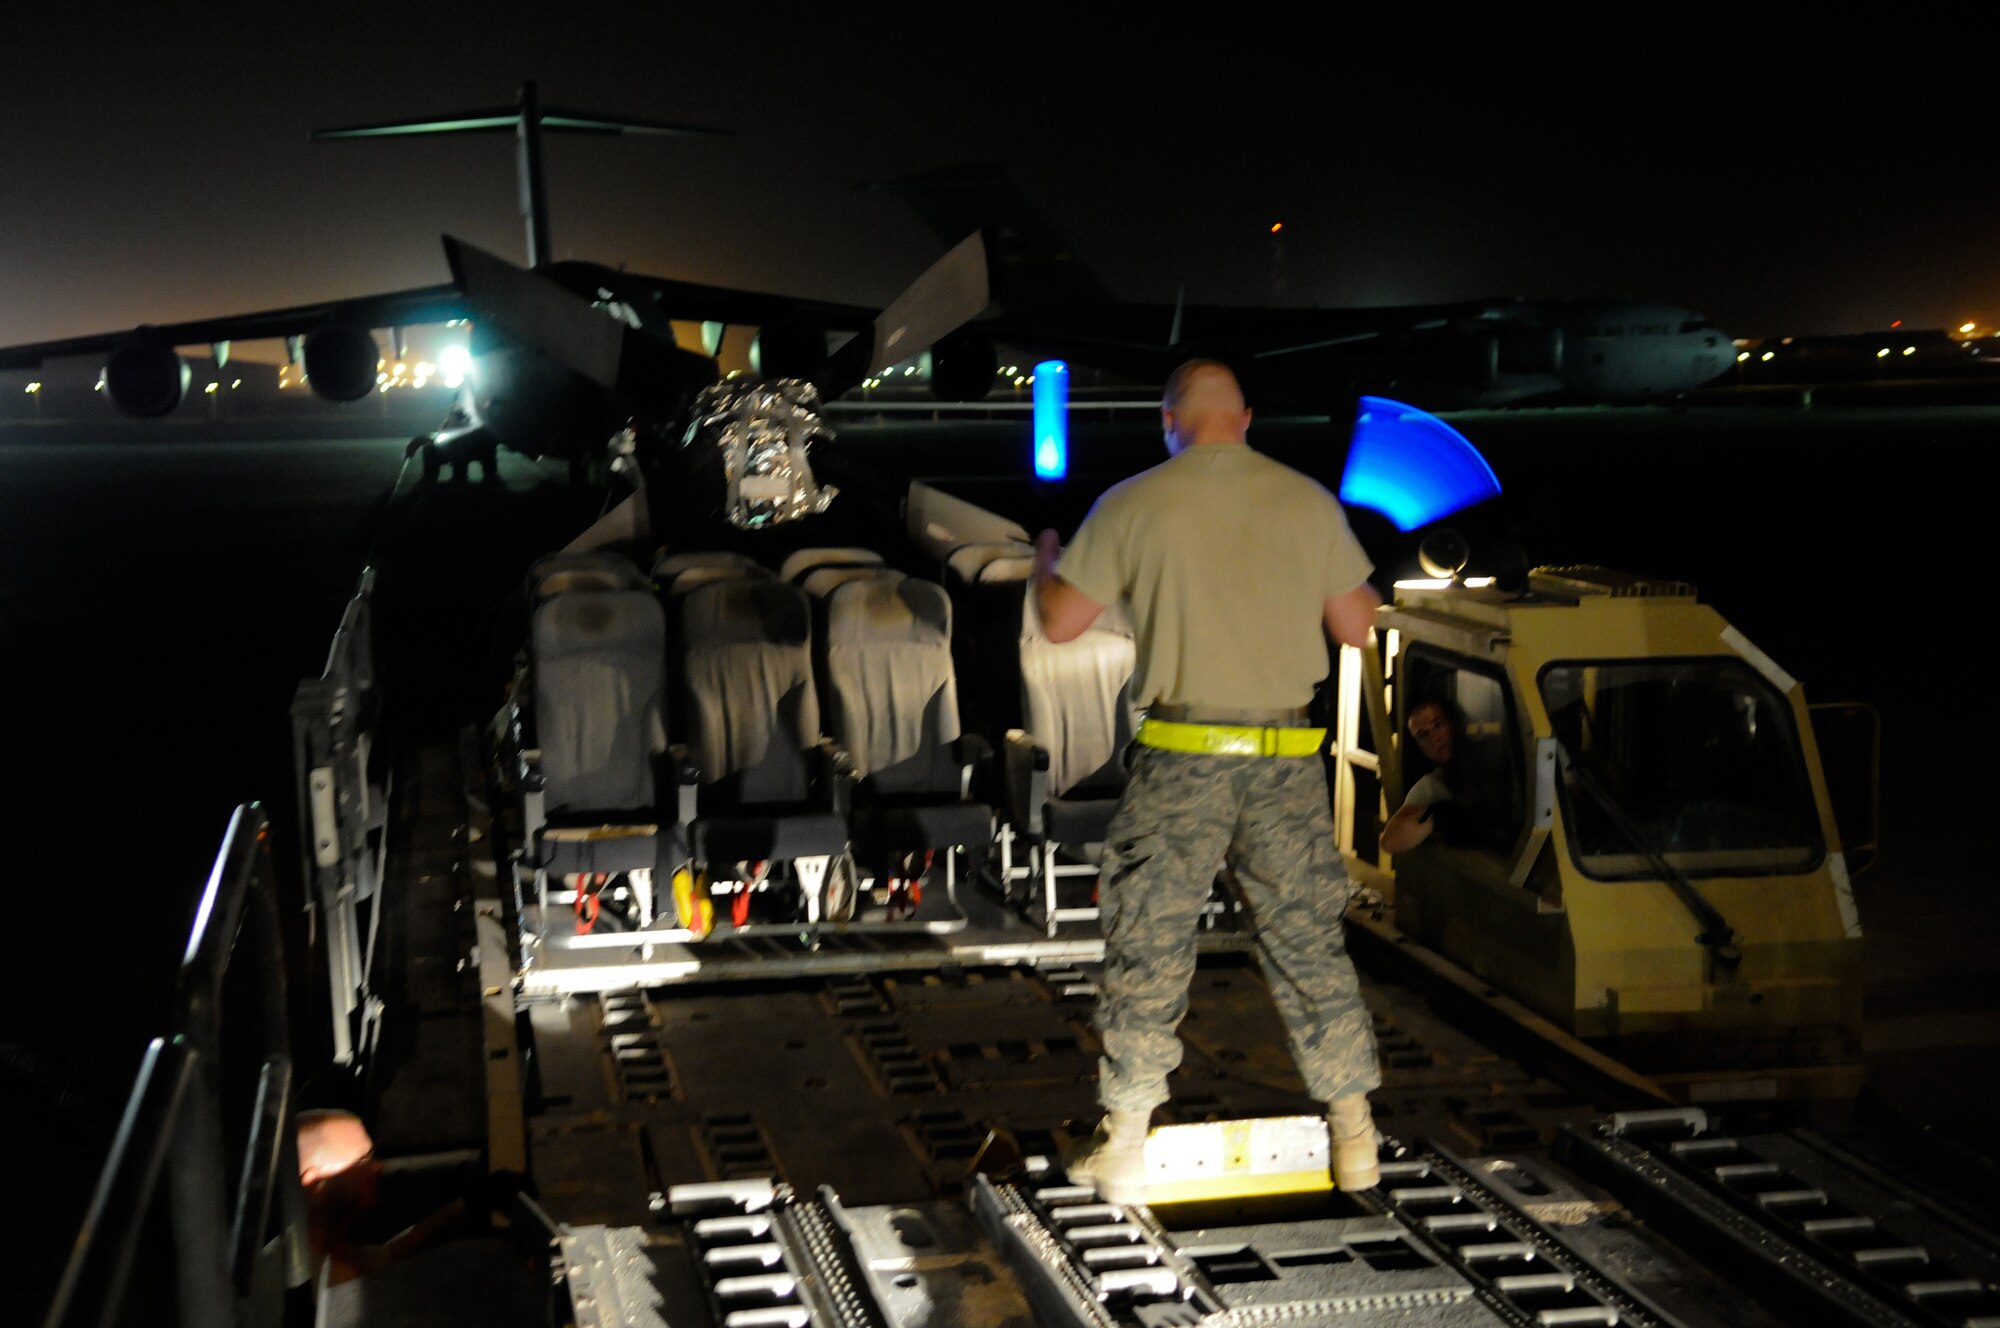 Senior Airman Joseph Daigneault, air transportation craftsman assigned to the 8th Expeditionary Air Mobility Squadron, lines up a 25K loader with a 60K loader during an upload of passenger seats and a C-130 Hercules propeller into a C-17 Globemaster III, October 29, at an undisclosed air base in Southwest Asia.  The C-17 is capable of rapid strategic delivery of troops and all types of cargo to main operating bases or directly to forward bases in the Central Command area of responsibility.  Airman Daigneault, a native Lowell, Mass., is deployed from Little Rock Air Force Base, Ark., in support of Operations Iraqi and Enduring Freedom and Joint Task Force-Horn of Africa.  (U.S. Air Force photo by Tech. Sgt. Michael Boquette/Released)